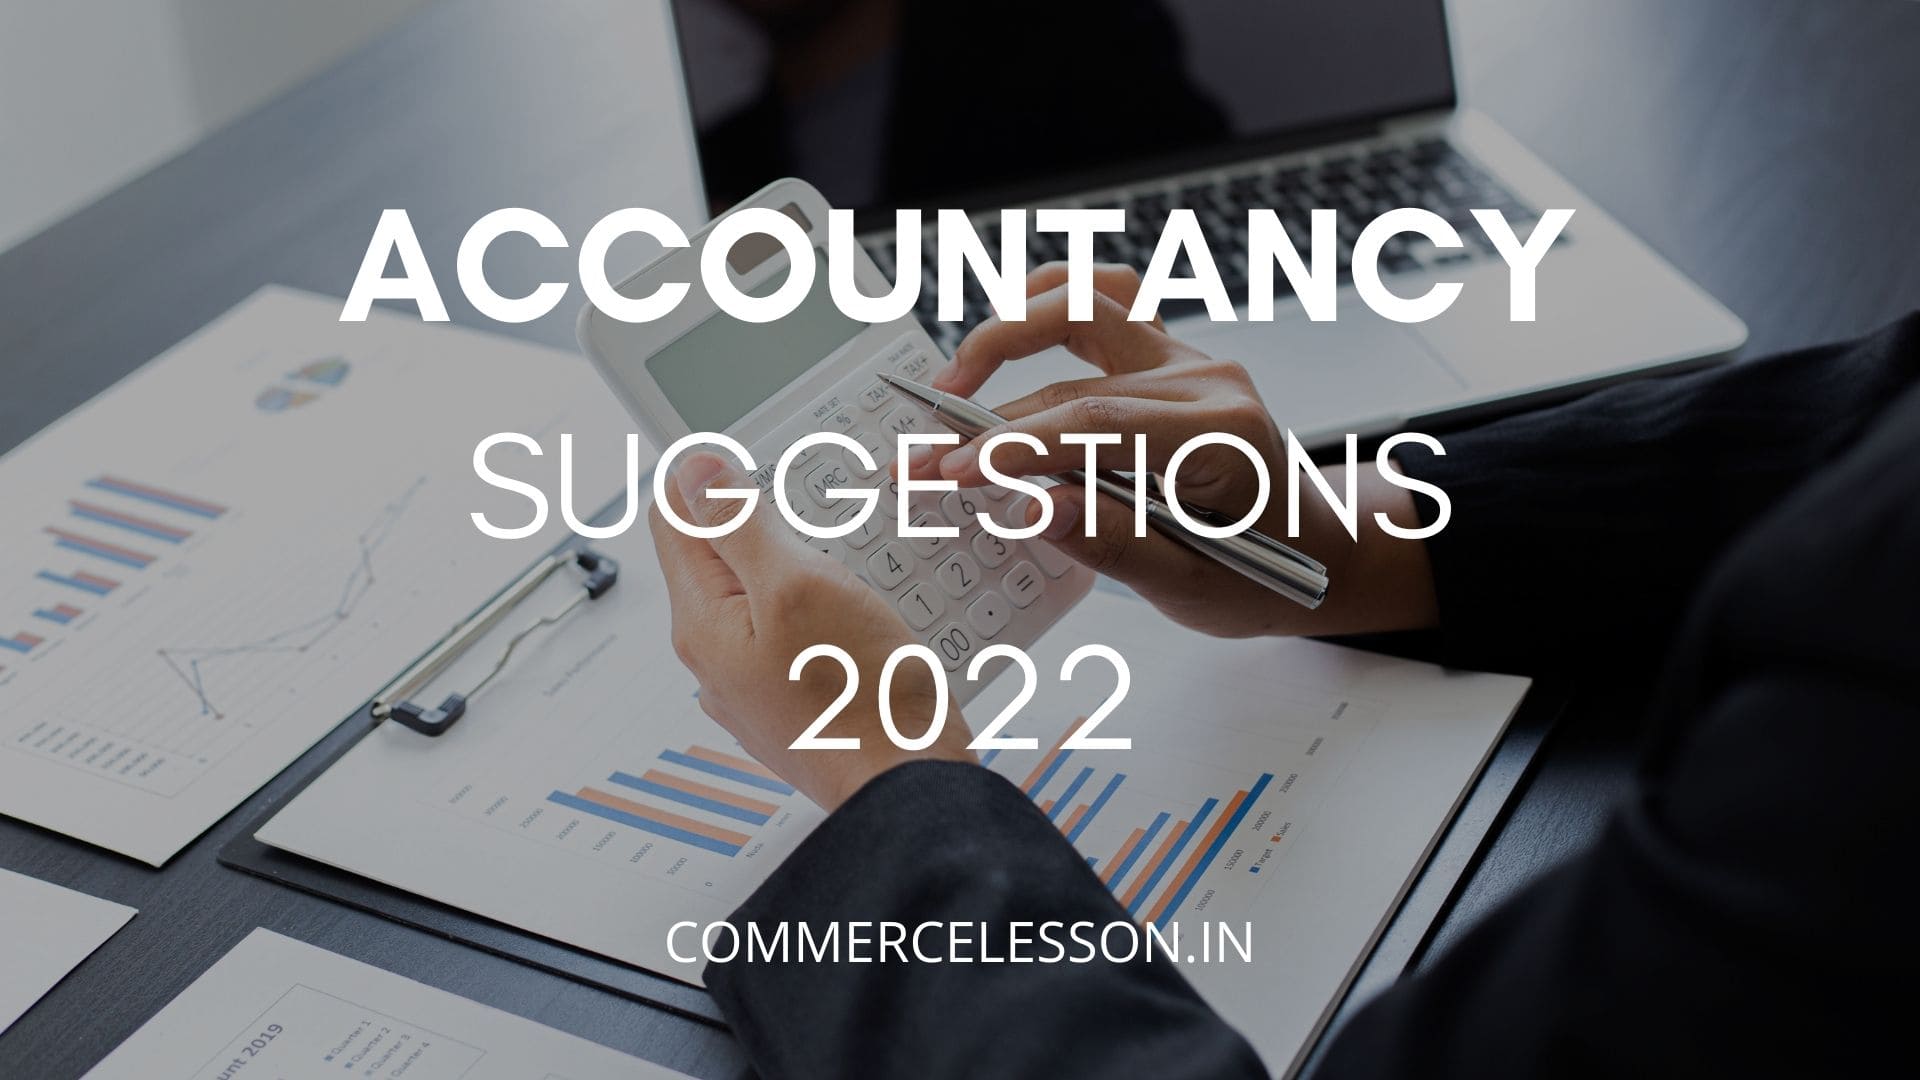 Accountancy Suggestions 2022